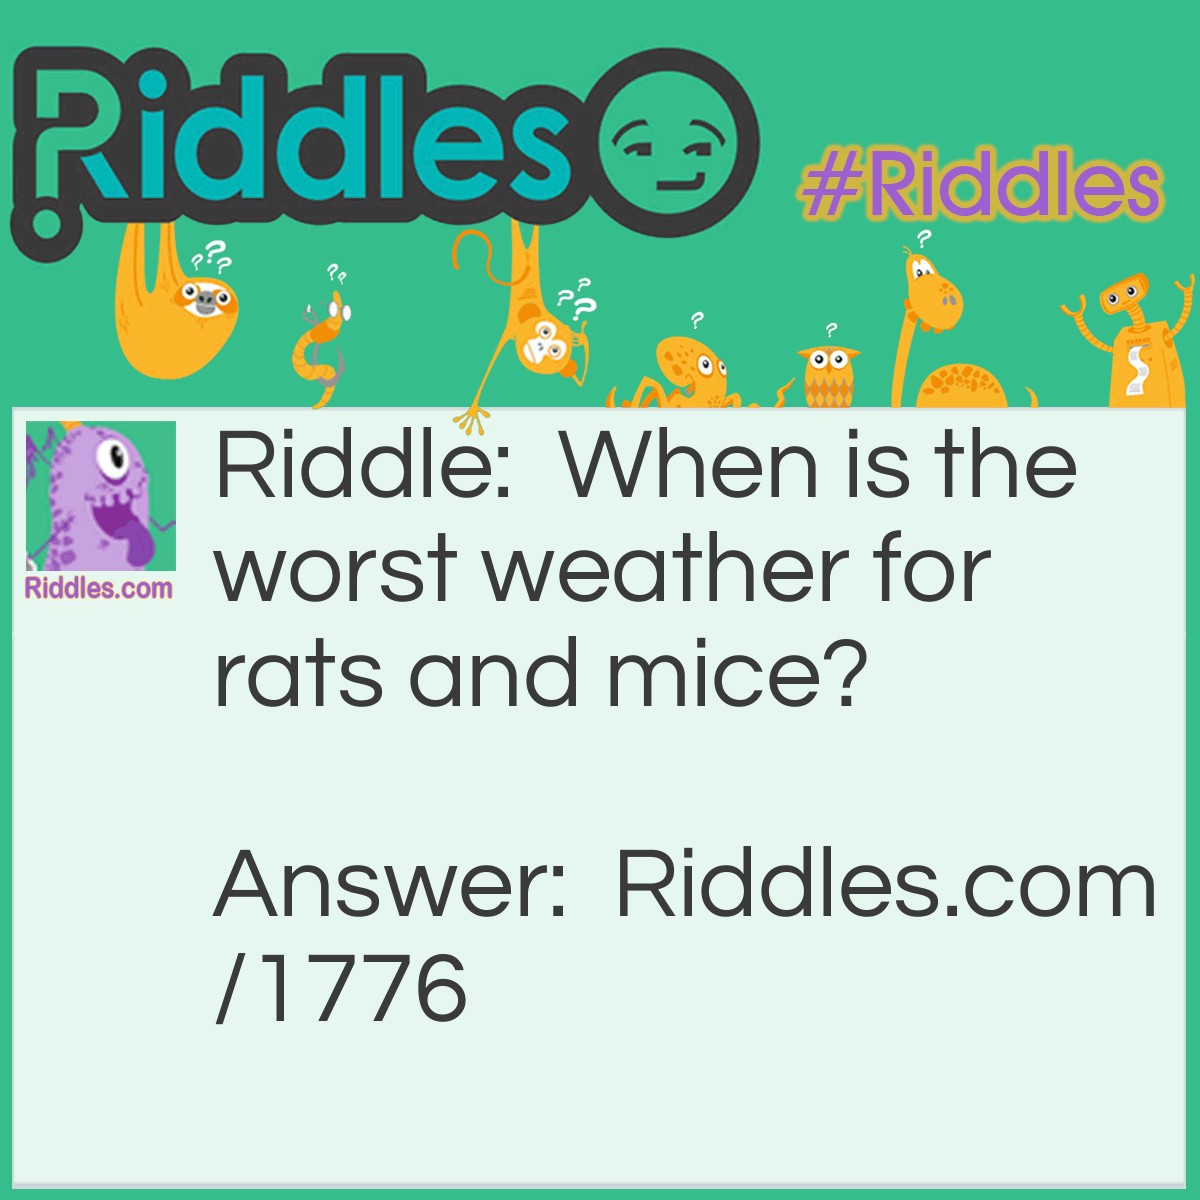 Riddle: What is the worst weather for rats and mice? Answer: When it rains cats and dogs.